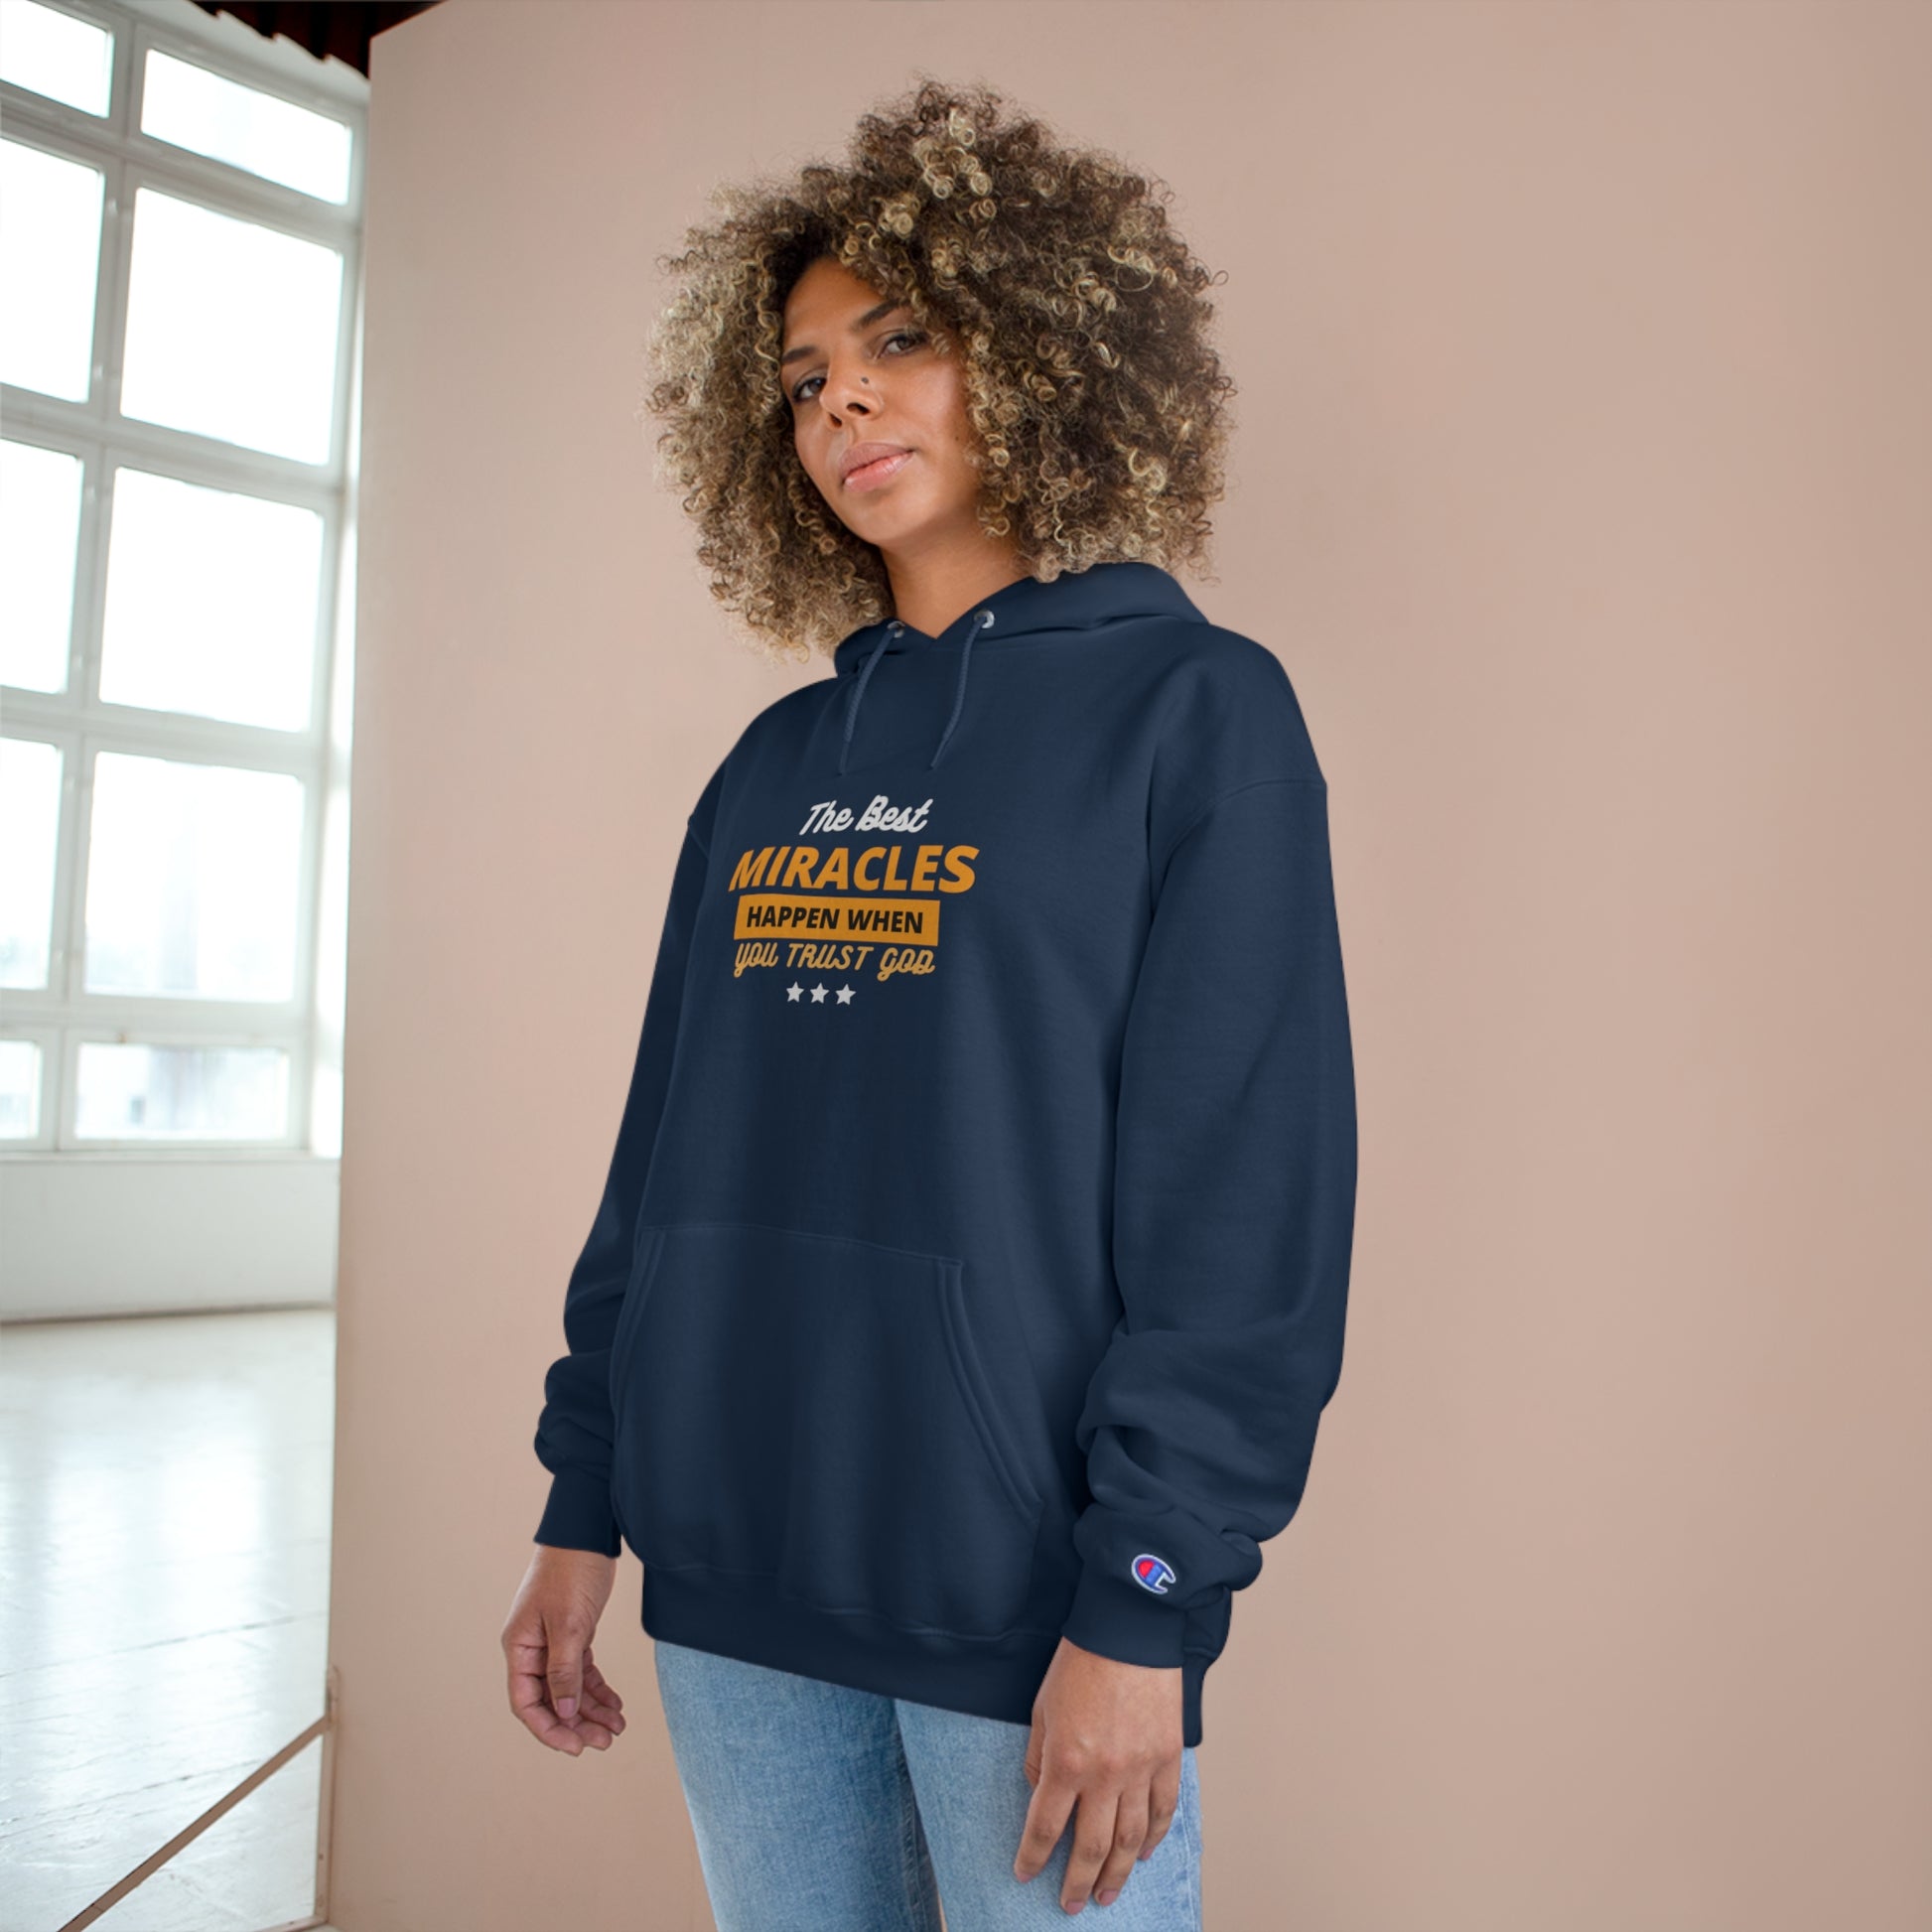 The Best Miracles Happen When You Trust God Christian Unisex Champion Hoodie Printify